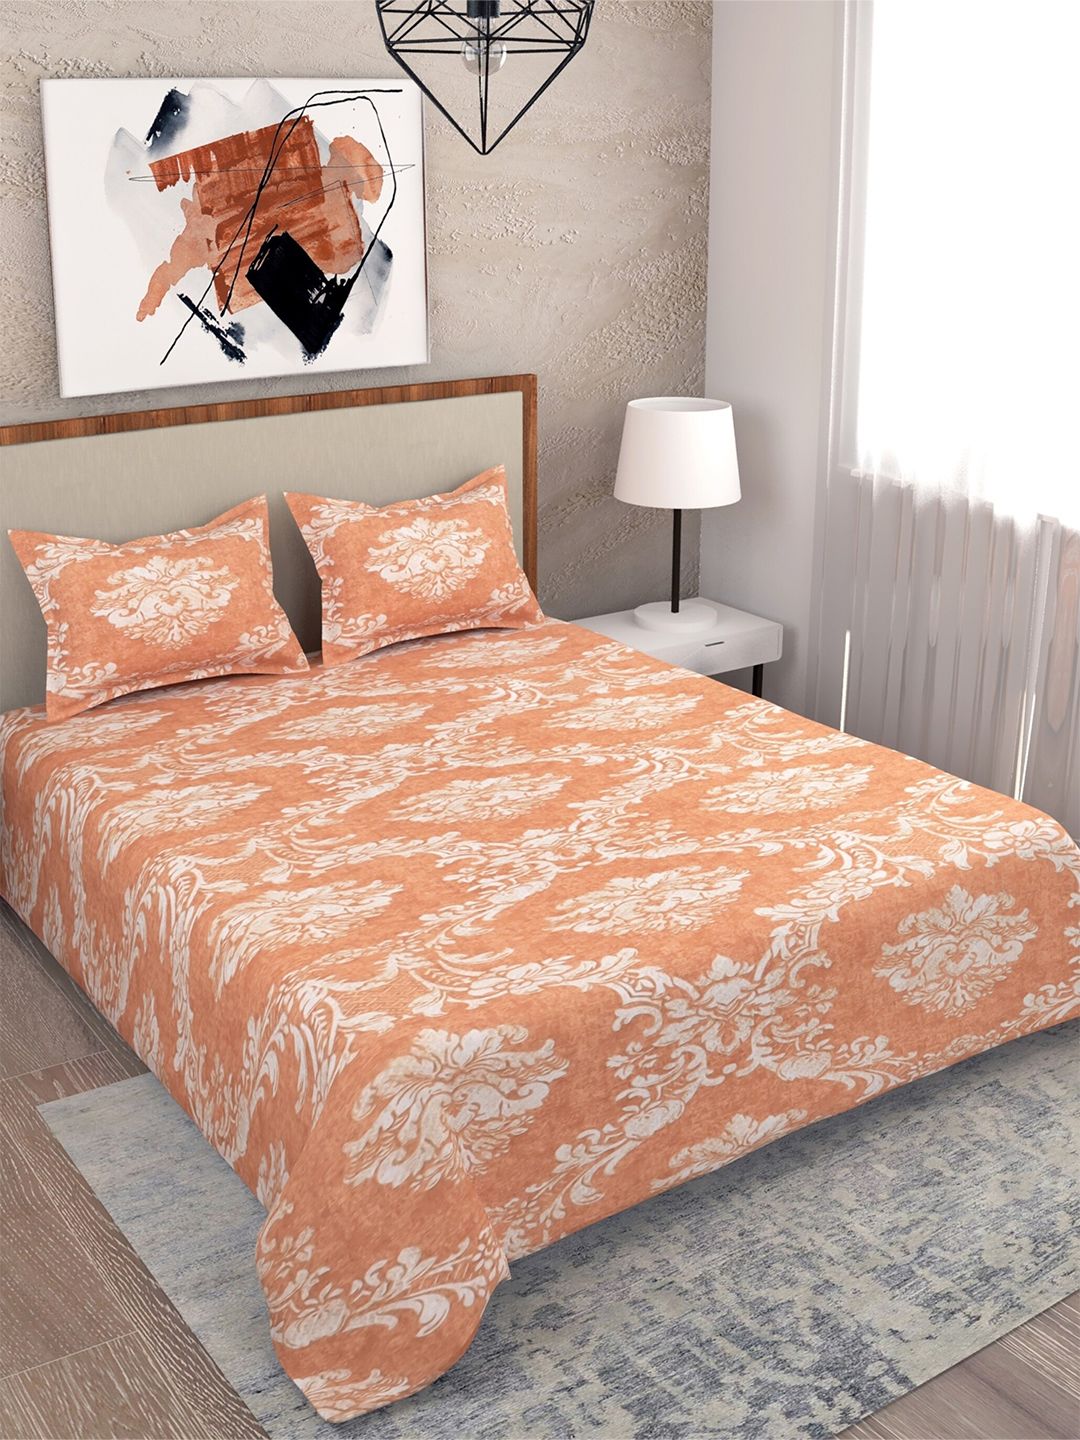 Salona Bichona Peach & White Floral Cotton 180 TC King Bedsheet with 2 Pillow Covers Price in India